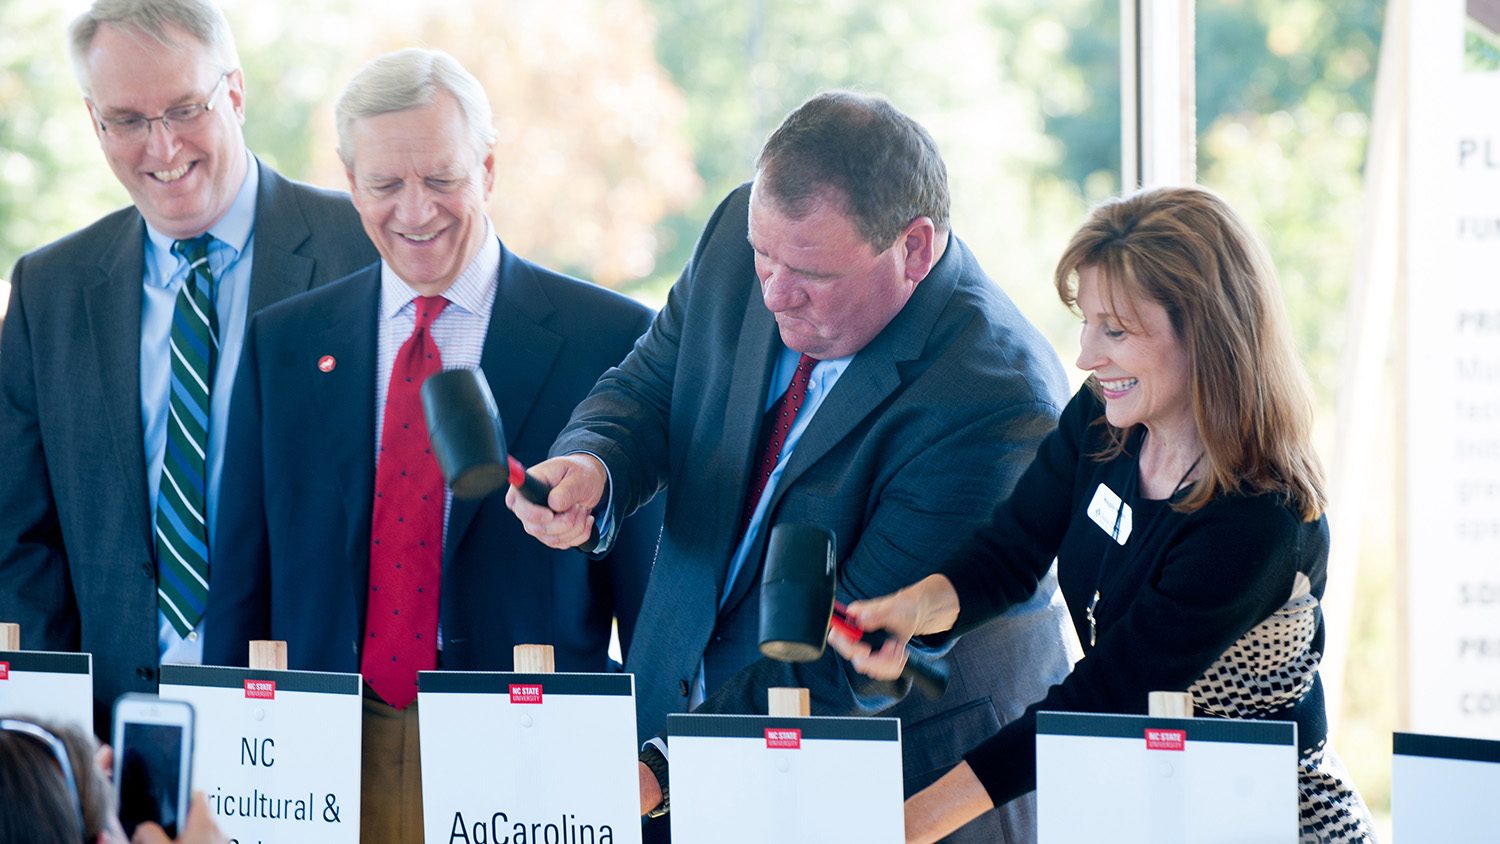 Four stakeholders, pounding stakes into the ground with rubber mallets